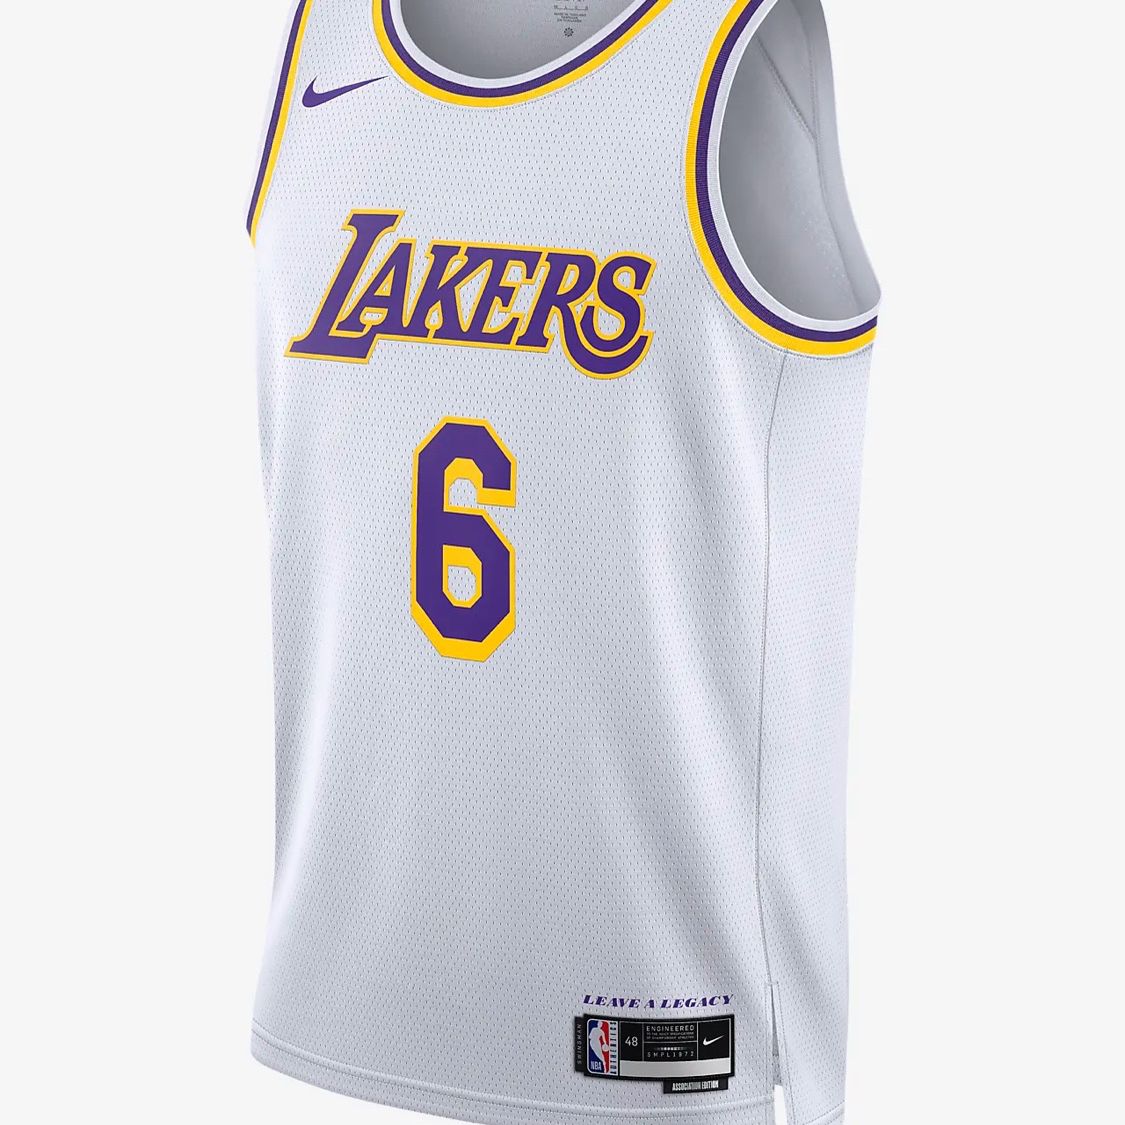 Lakers Nike Jersey Adult 2XL